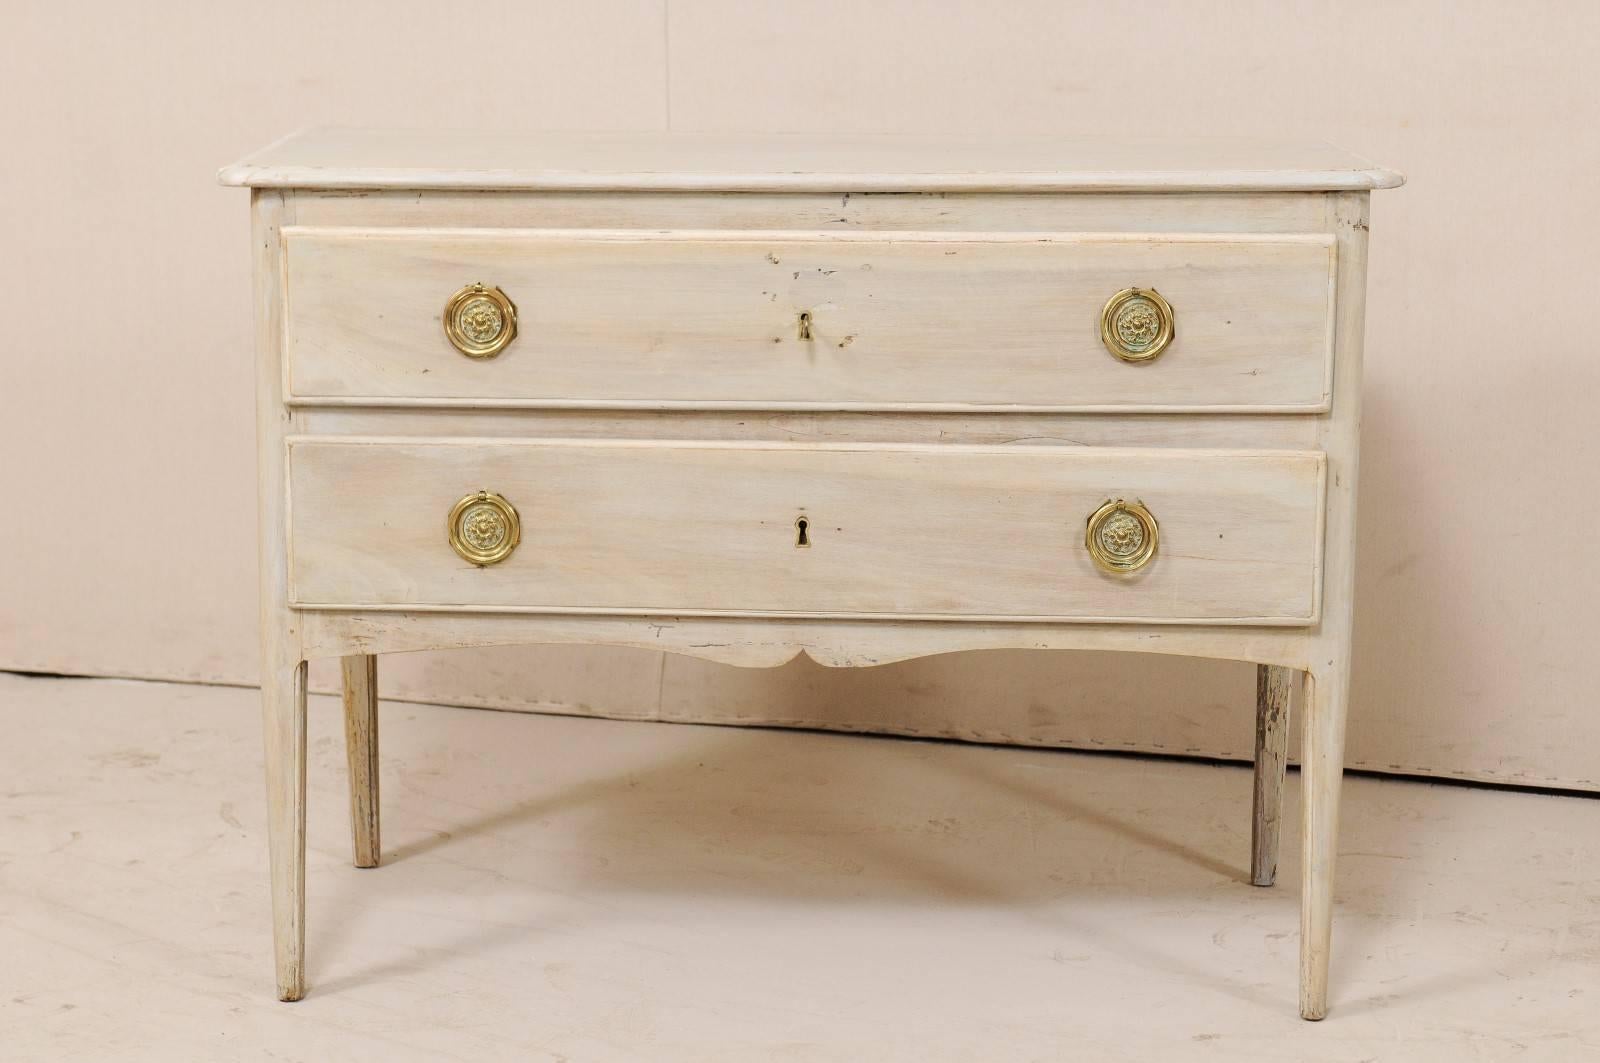 A French wooden two-drawer chest from the early 19th century. This antique French commode features a simple and clean line body which is accented with a subtly scalloped accolade style carved skirt on three sides. There are two long drawers, adorn